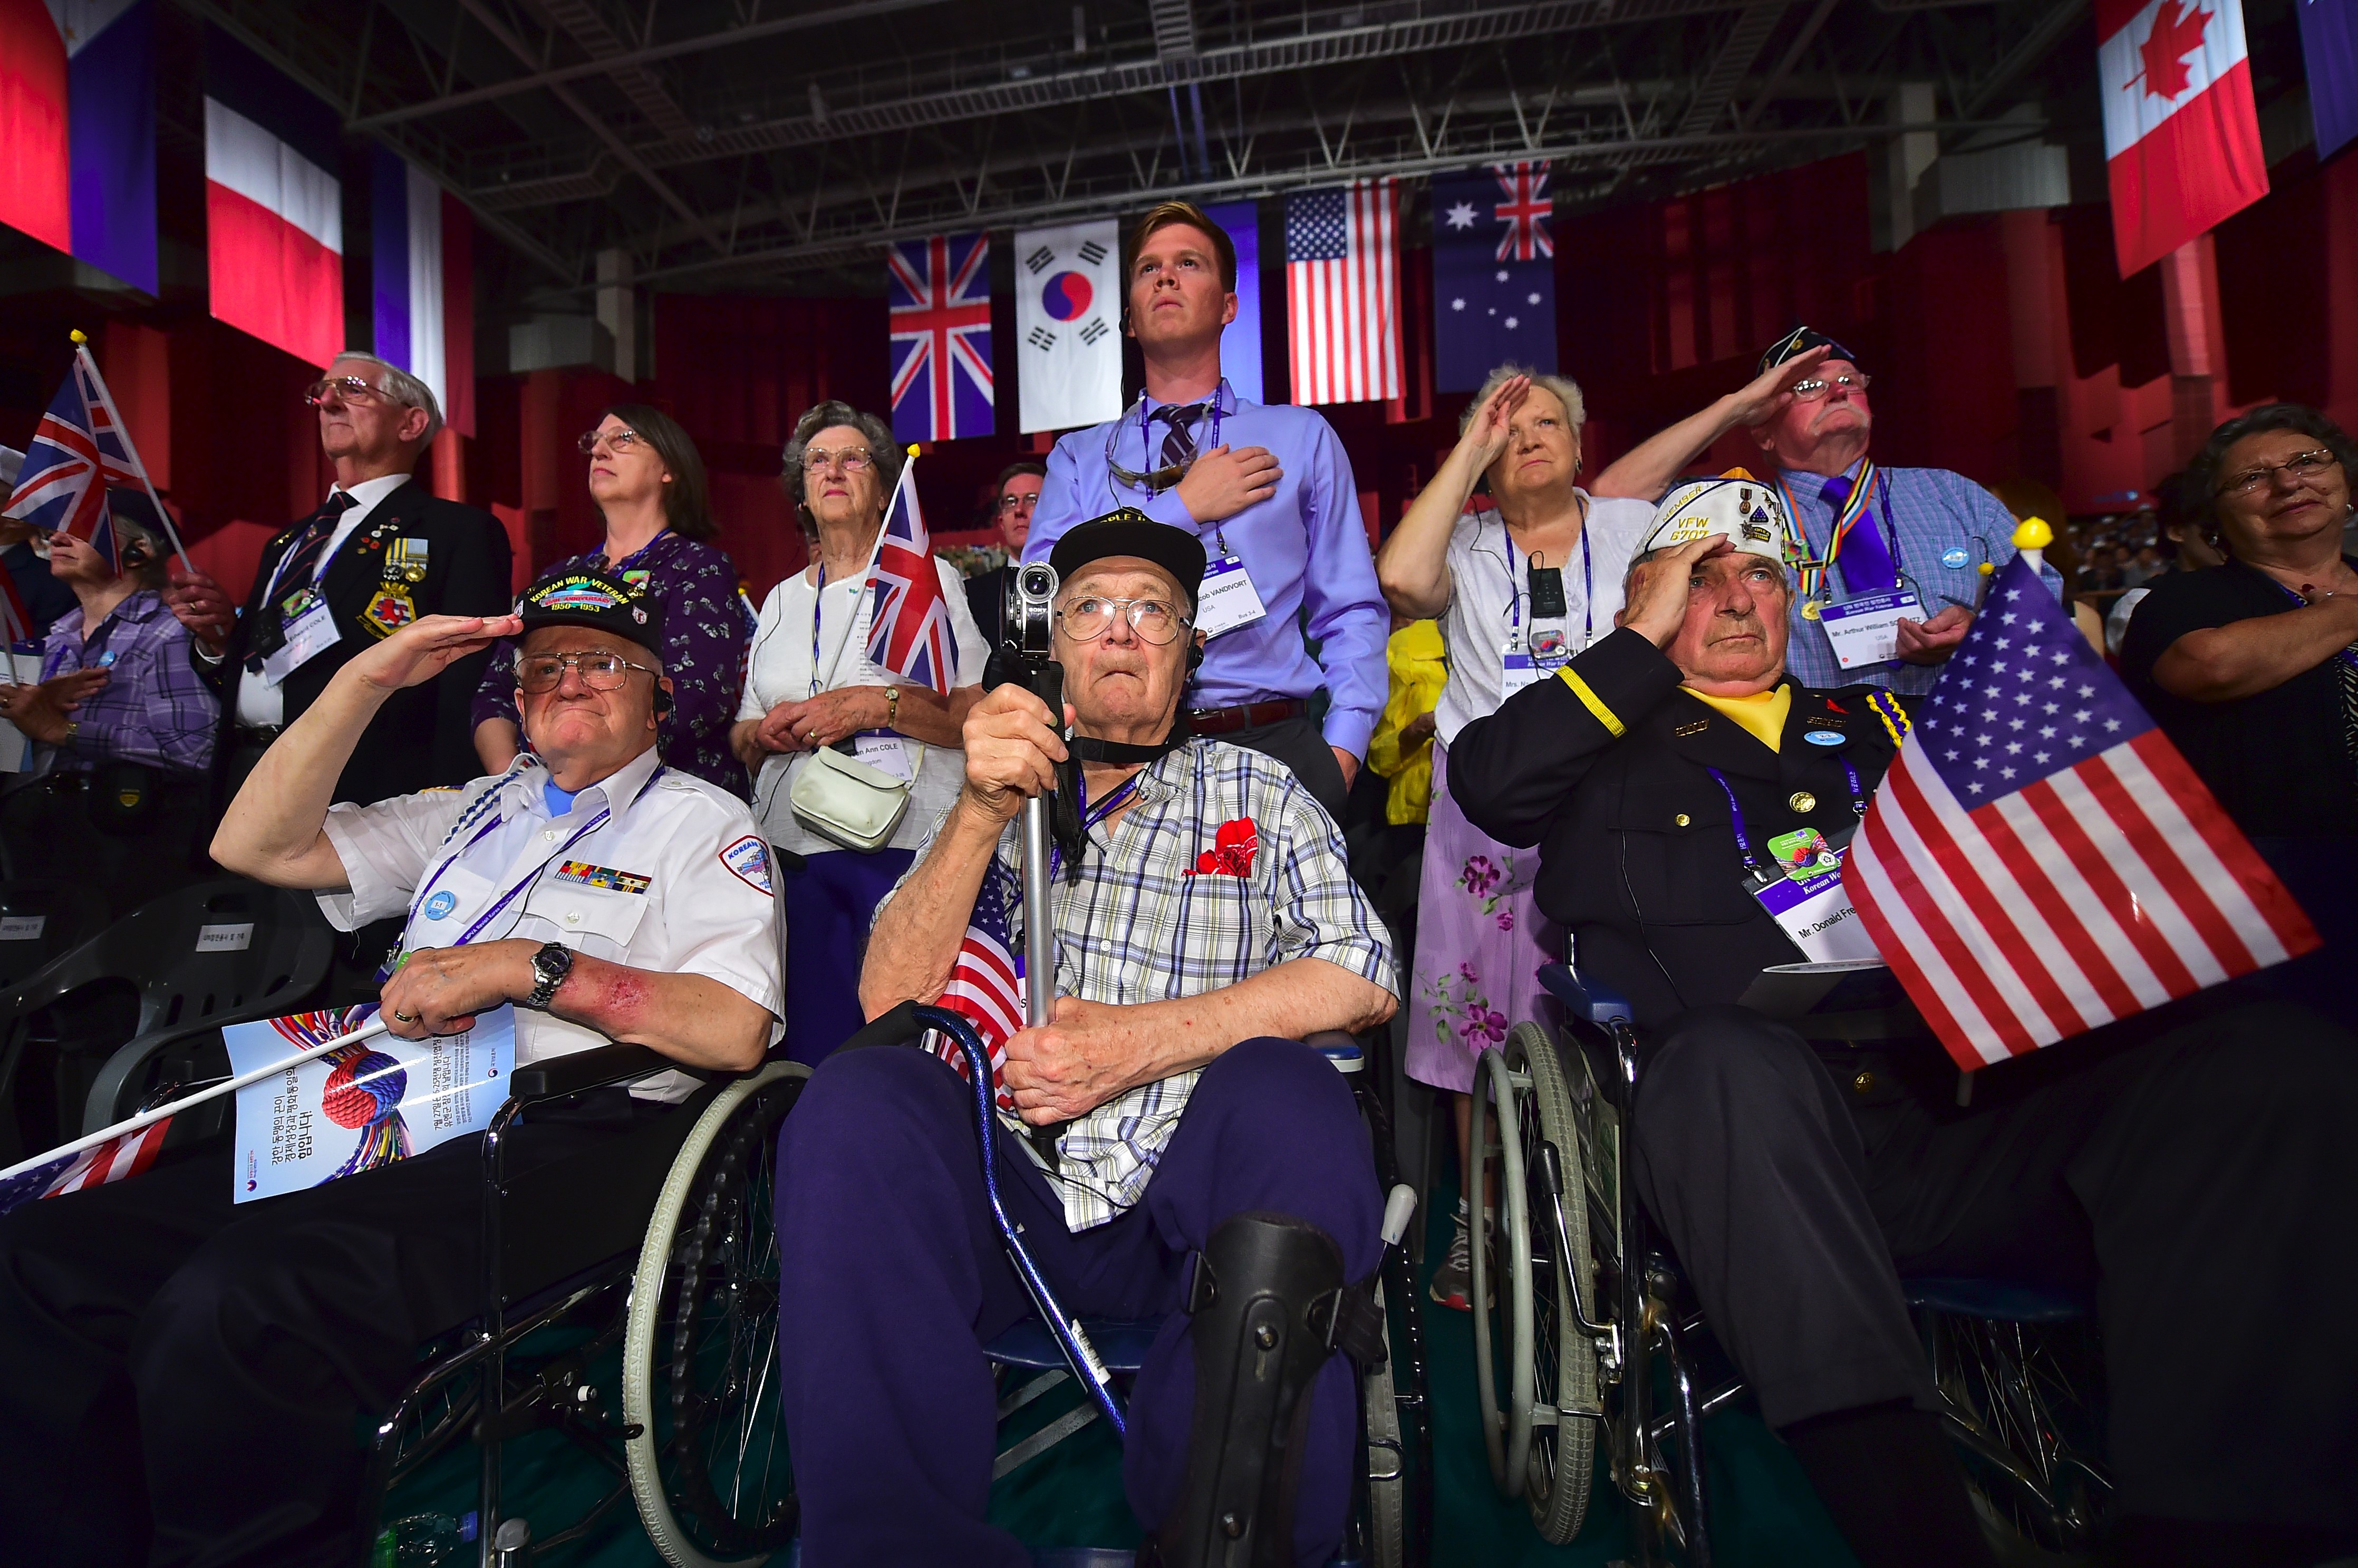 Invited US veterans, who fought in the Korean War under the United Nations flag, and their family members salute during a ceremony to commemorate the 63rd anniversary of the Korean War Armistice Agreement in Seoul on July 27, 2016. (JUNG YEON-JE—AFP/Getty Images)